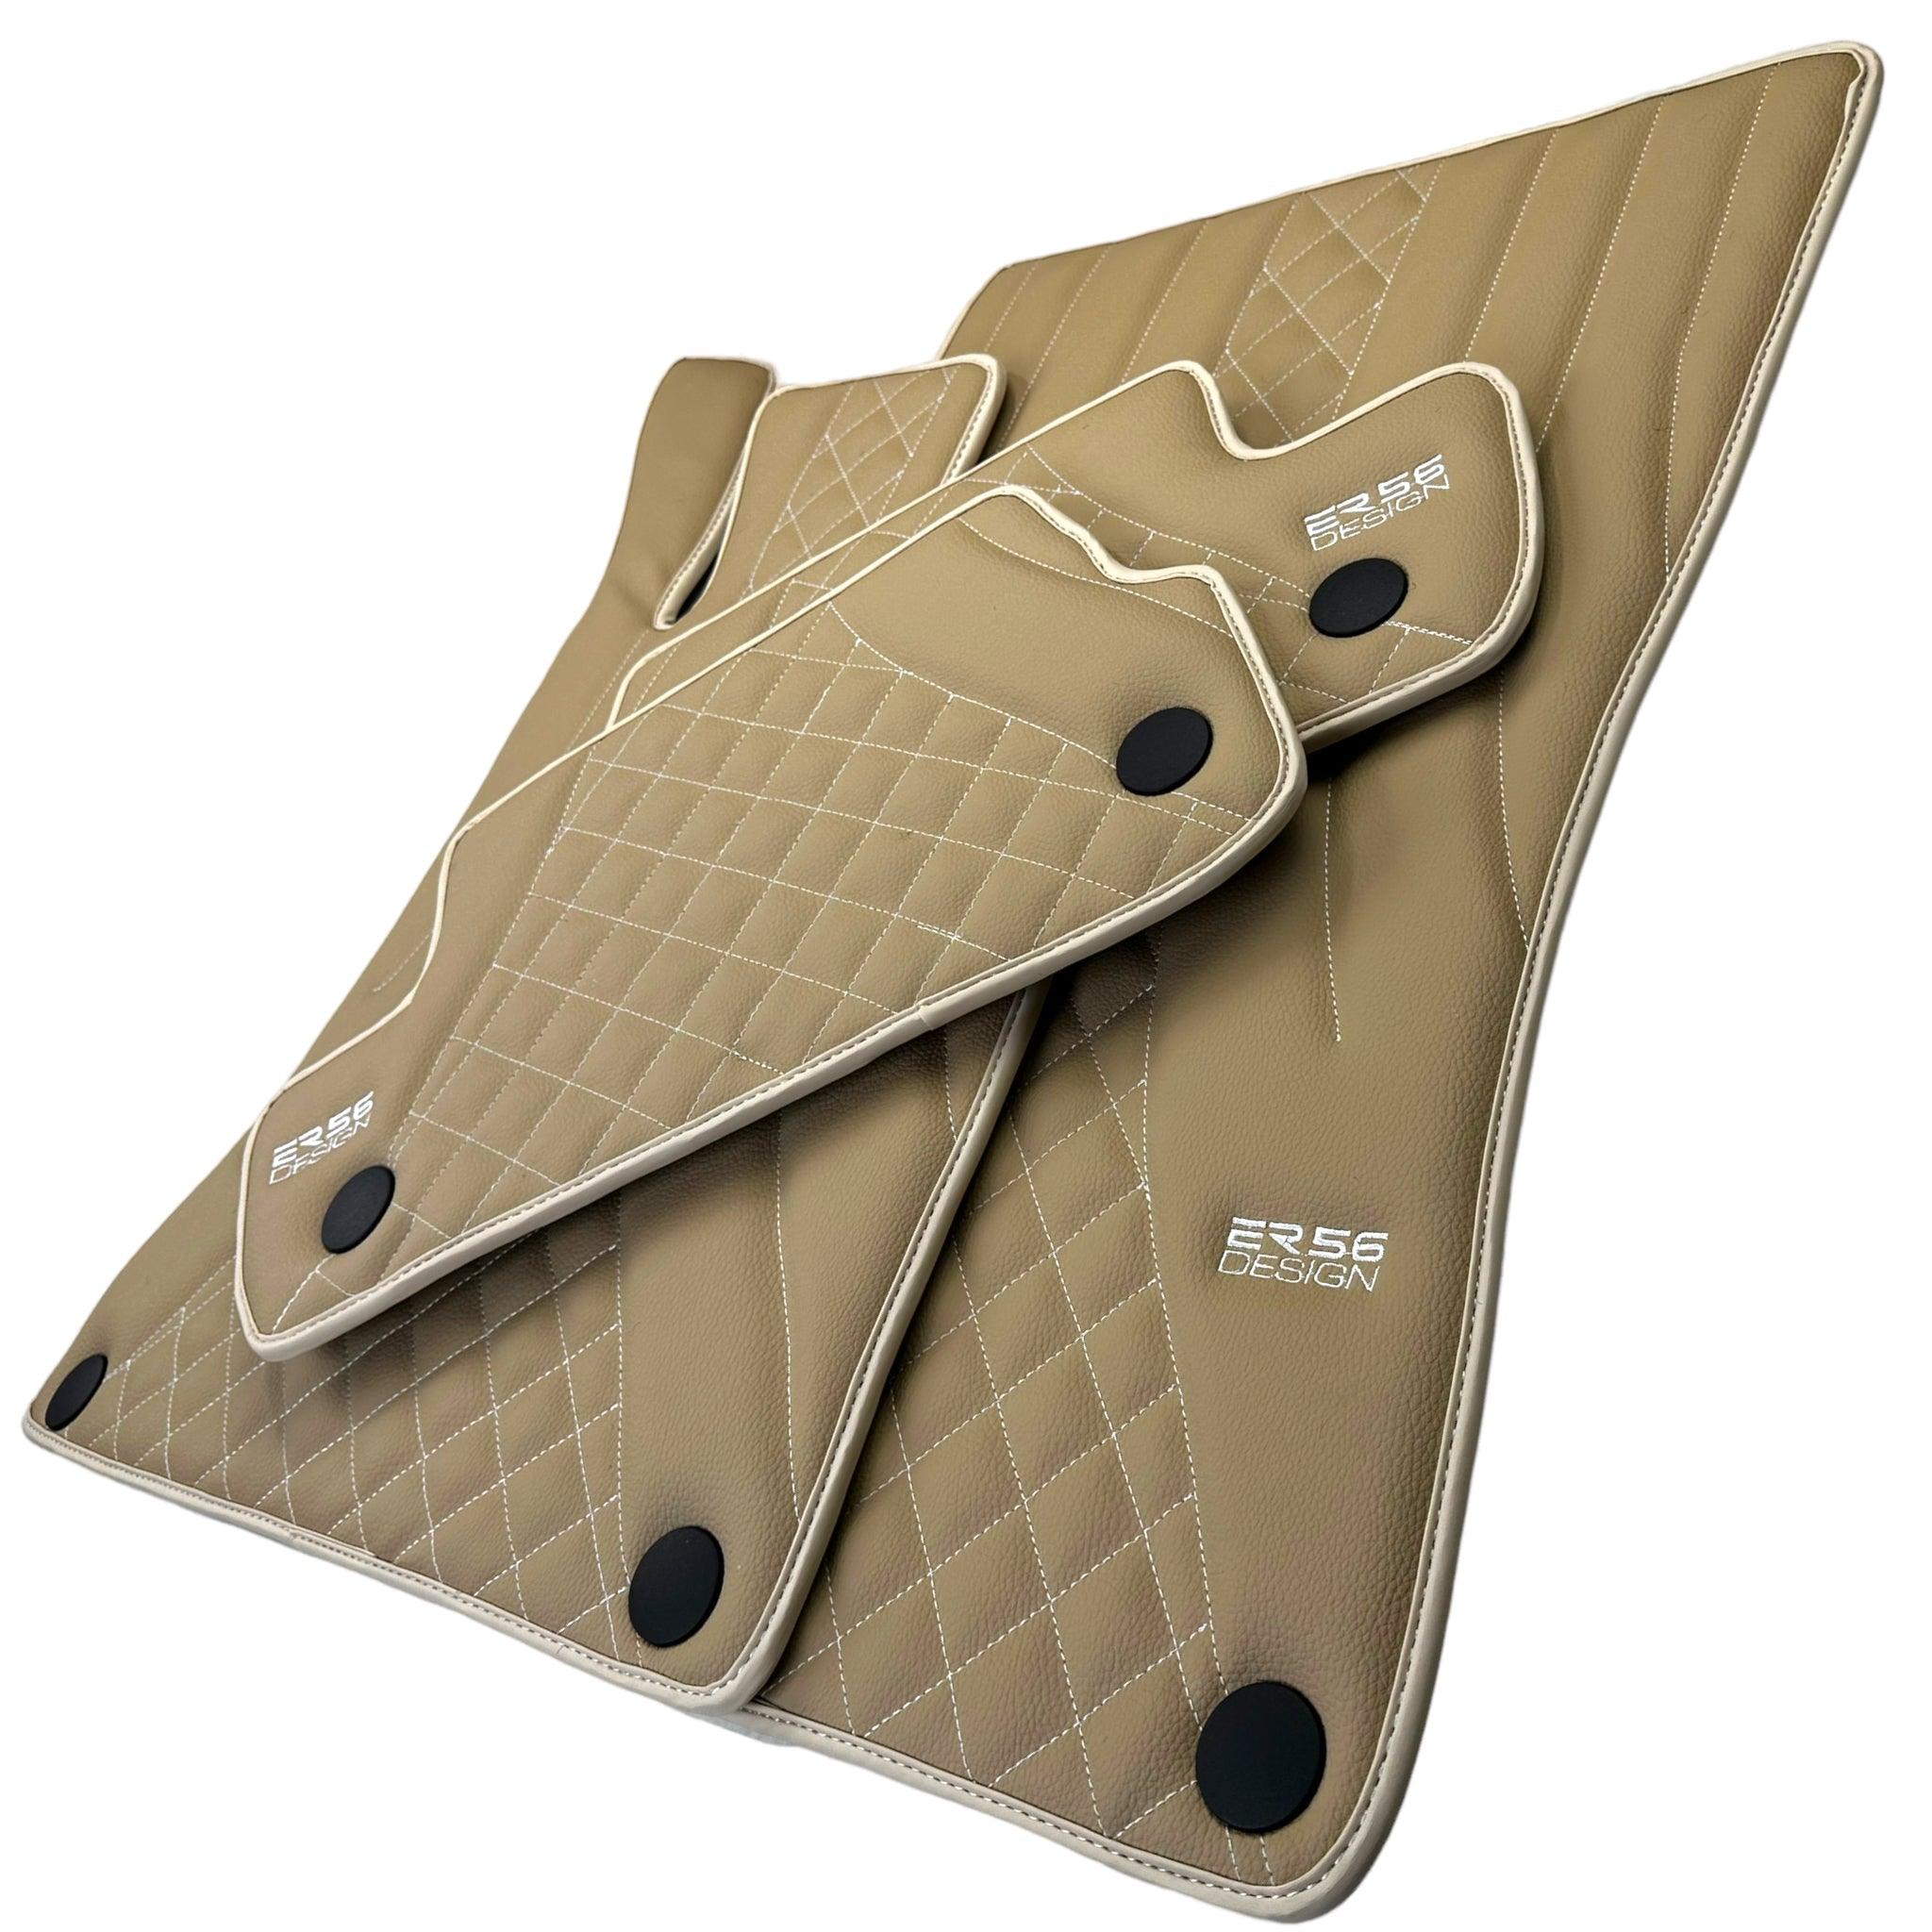 Beige Leather Floor Mats For Mercedes Benz CL-Class C216 Coupe (2006-2013)